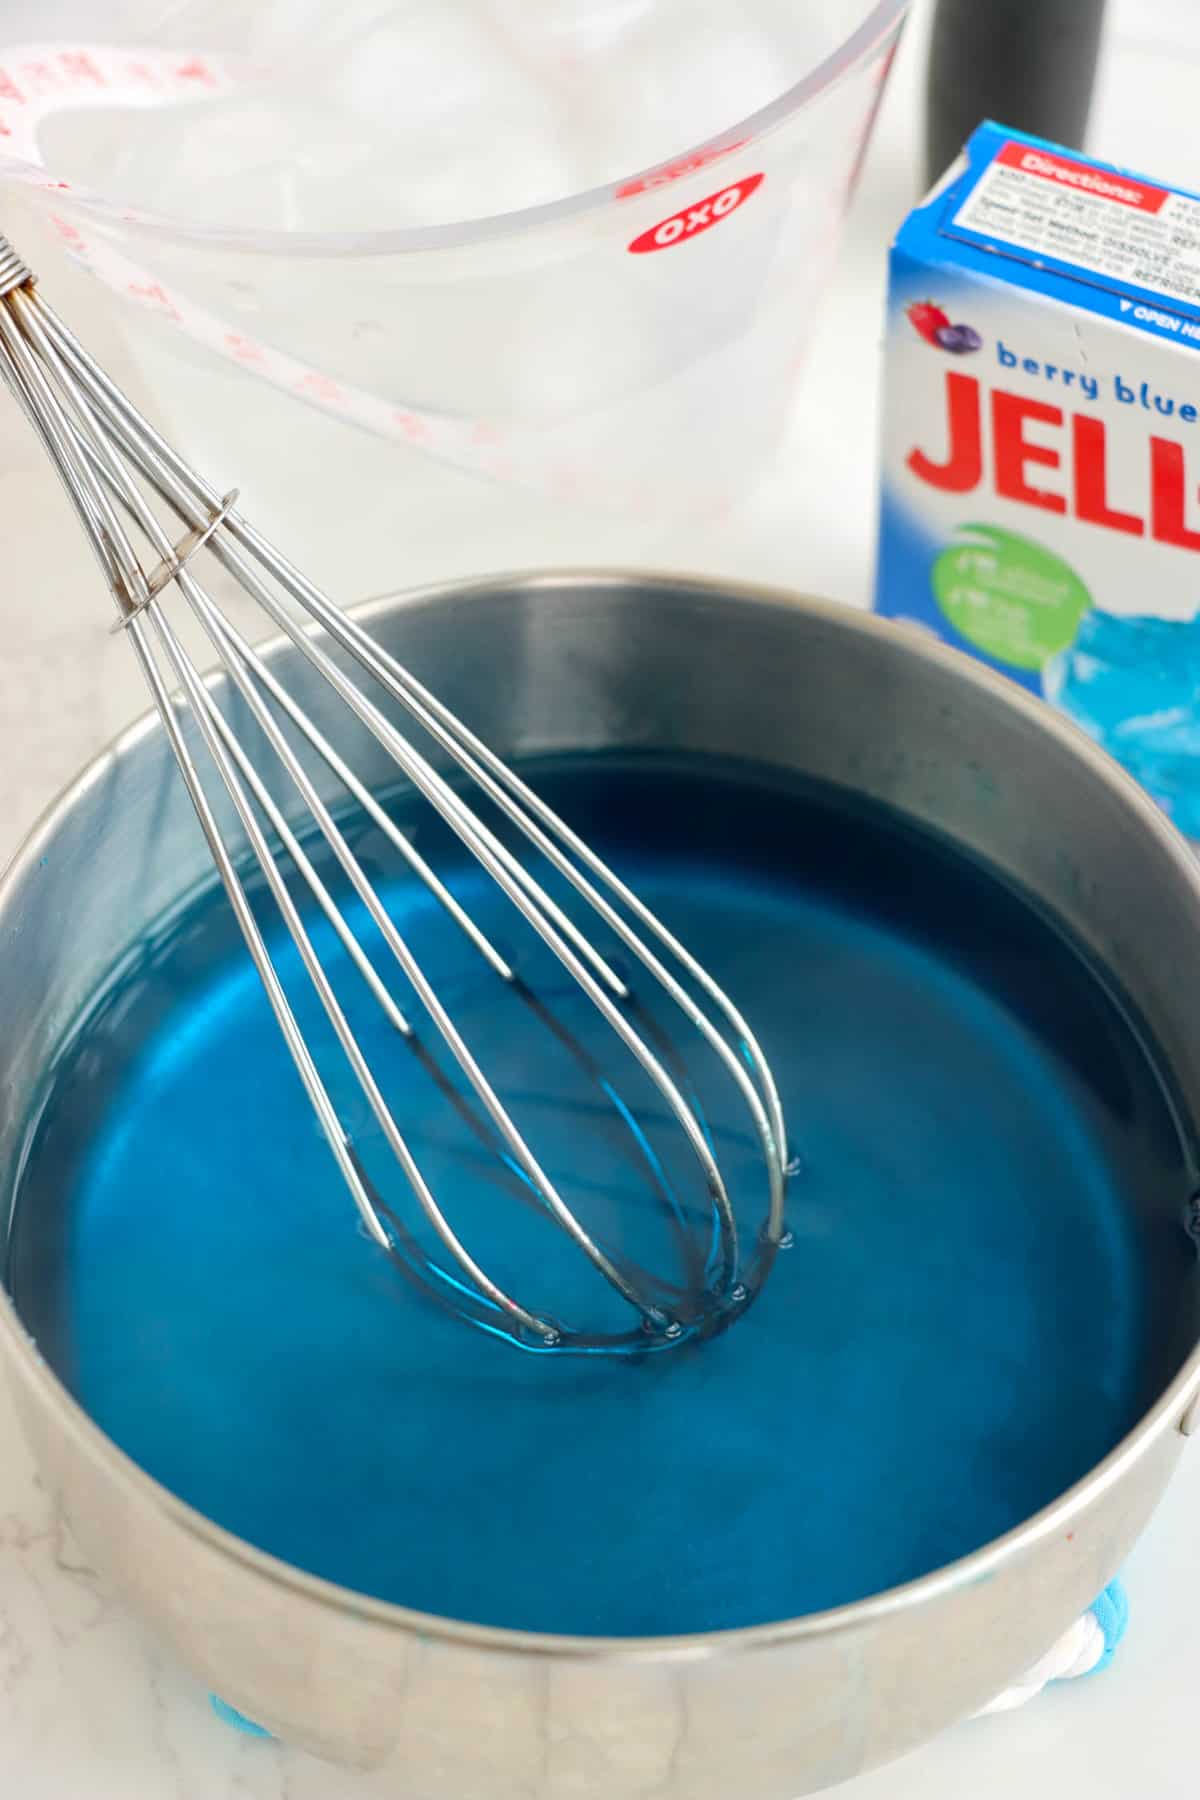 Make Jell-O According to the package, use Speed-Set method with ice cubes.